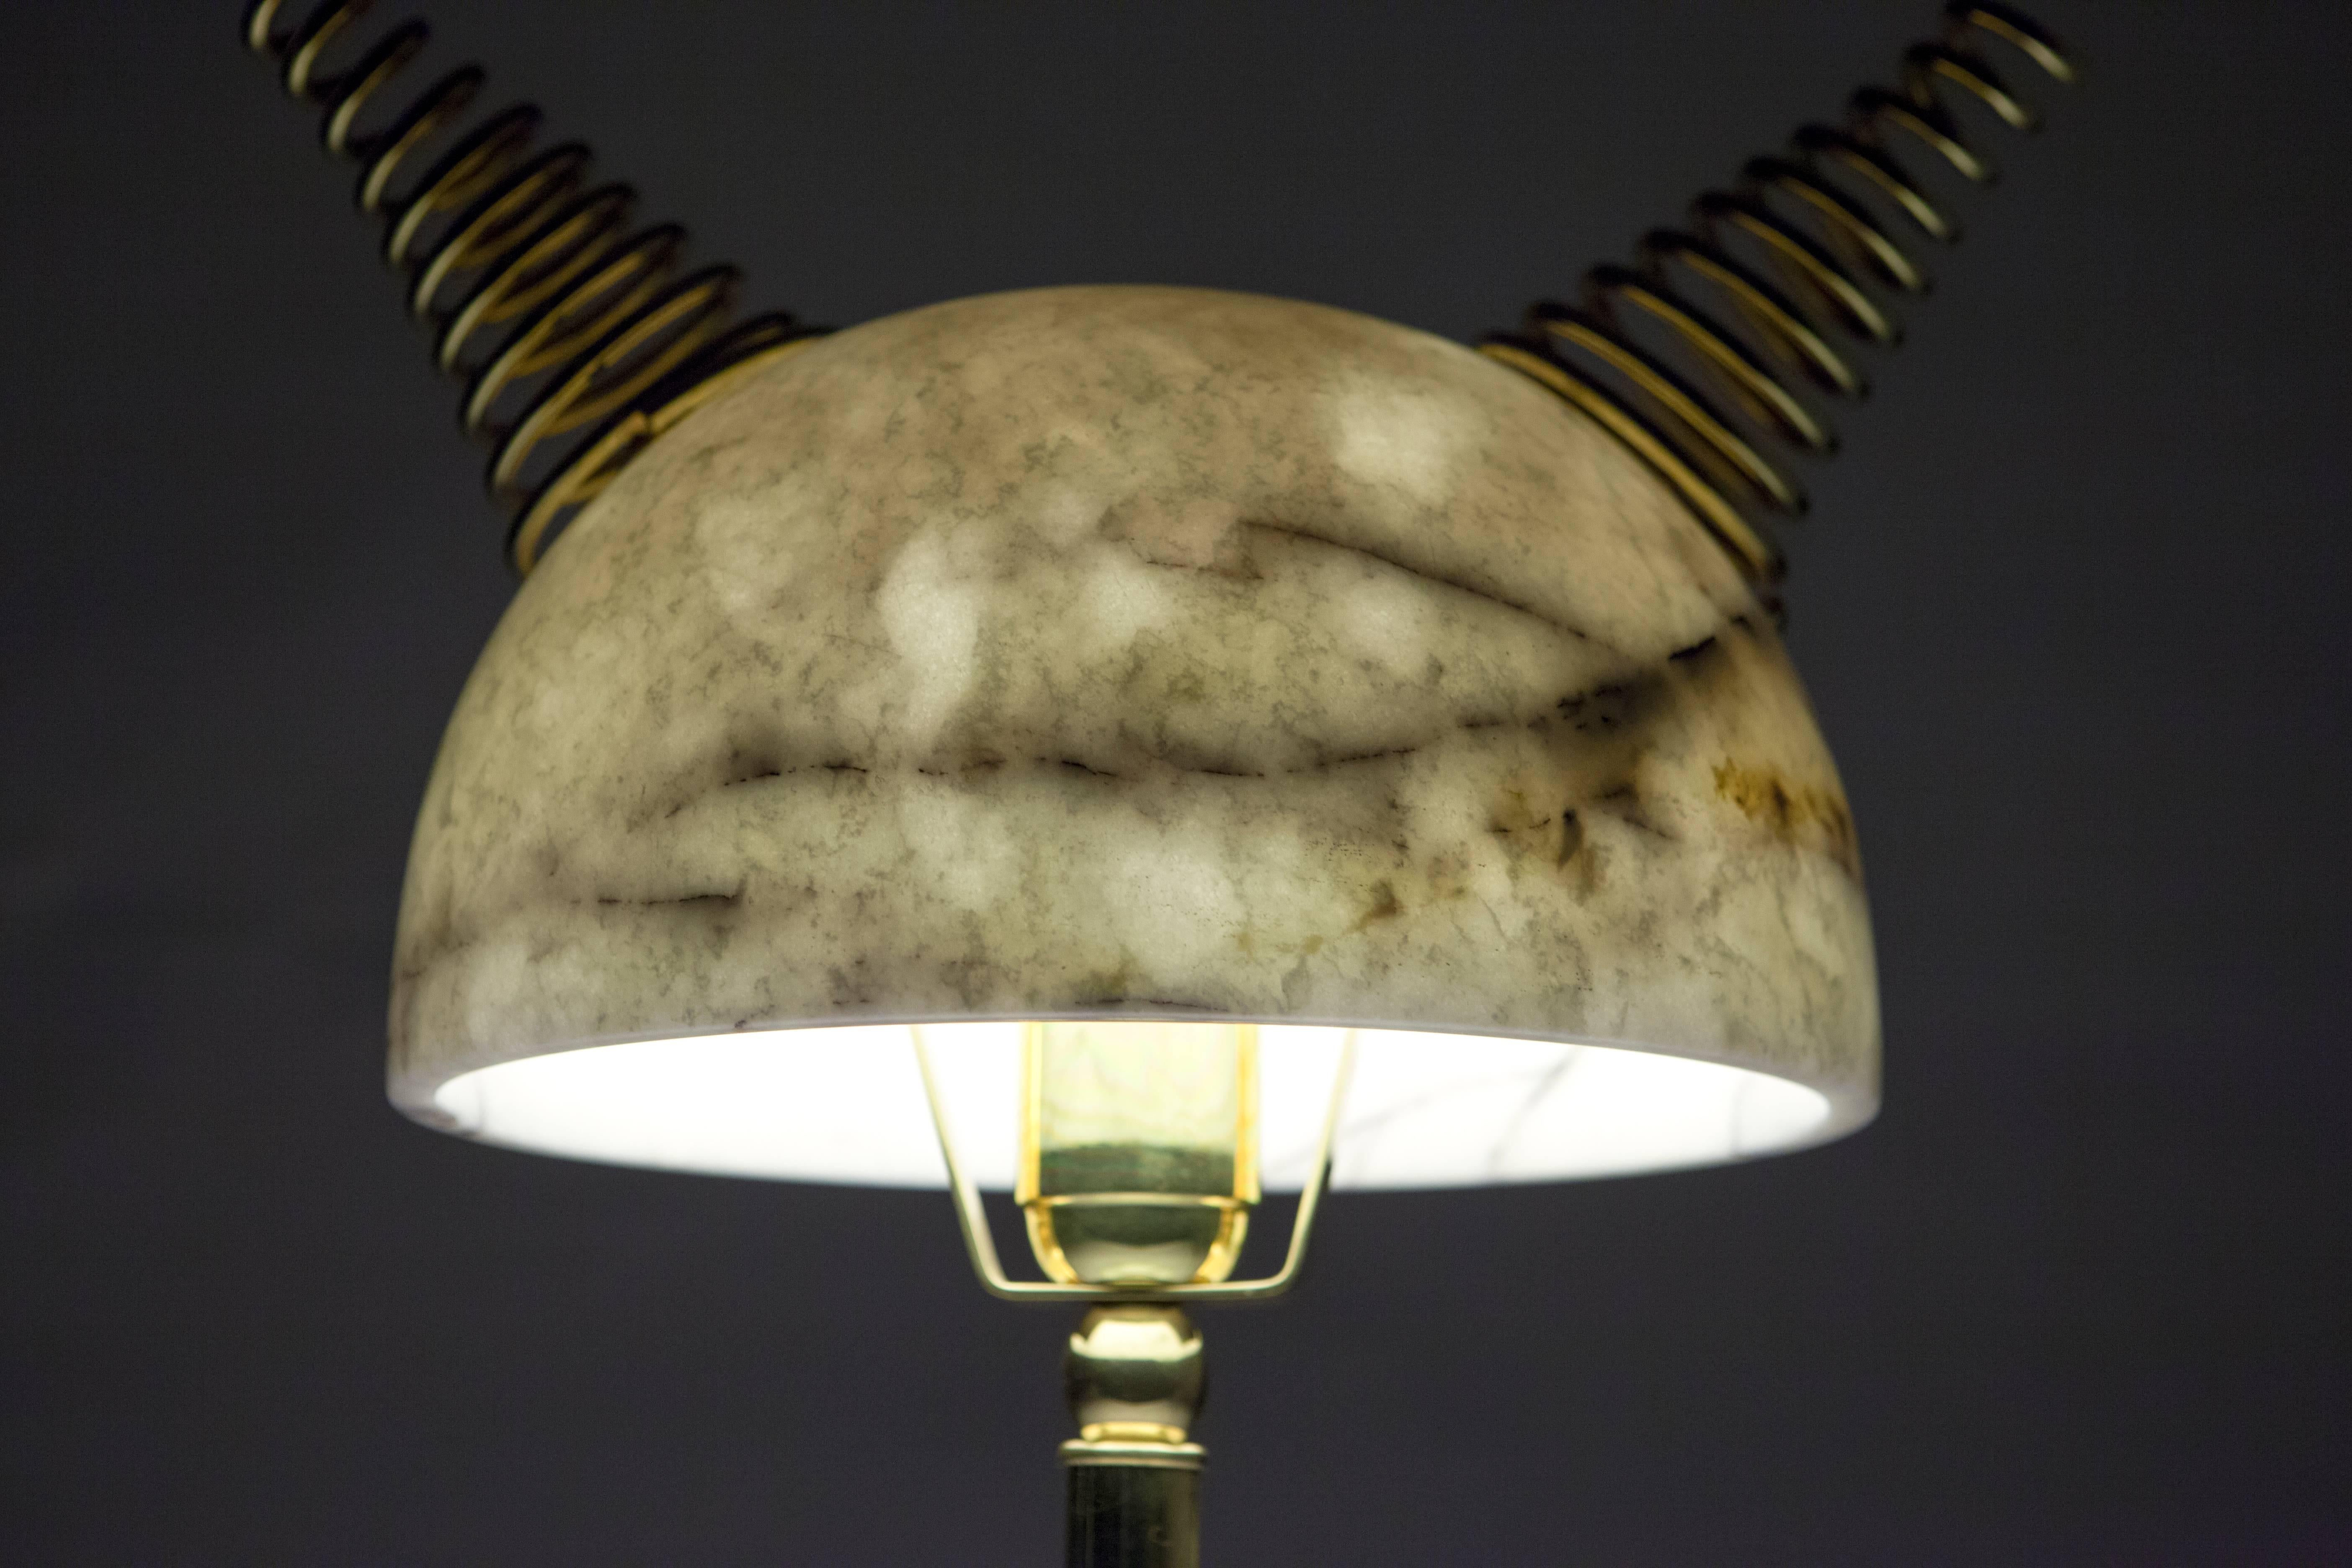 Turkish Min Lilla Anime Marble and Brass Table Lamp by Merve Kahraman For Sale